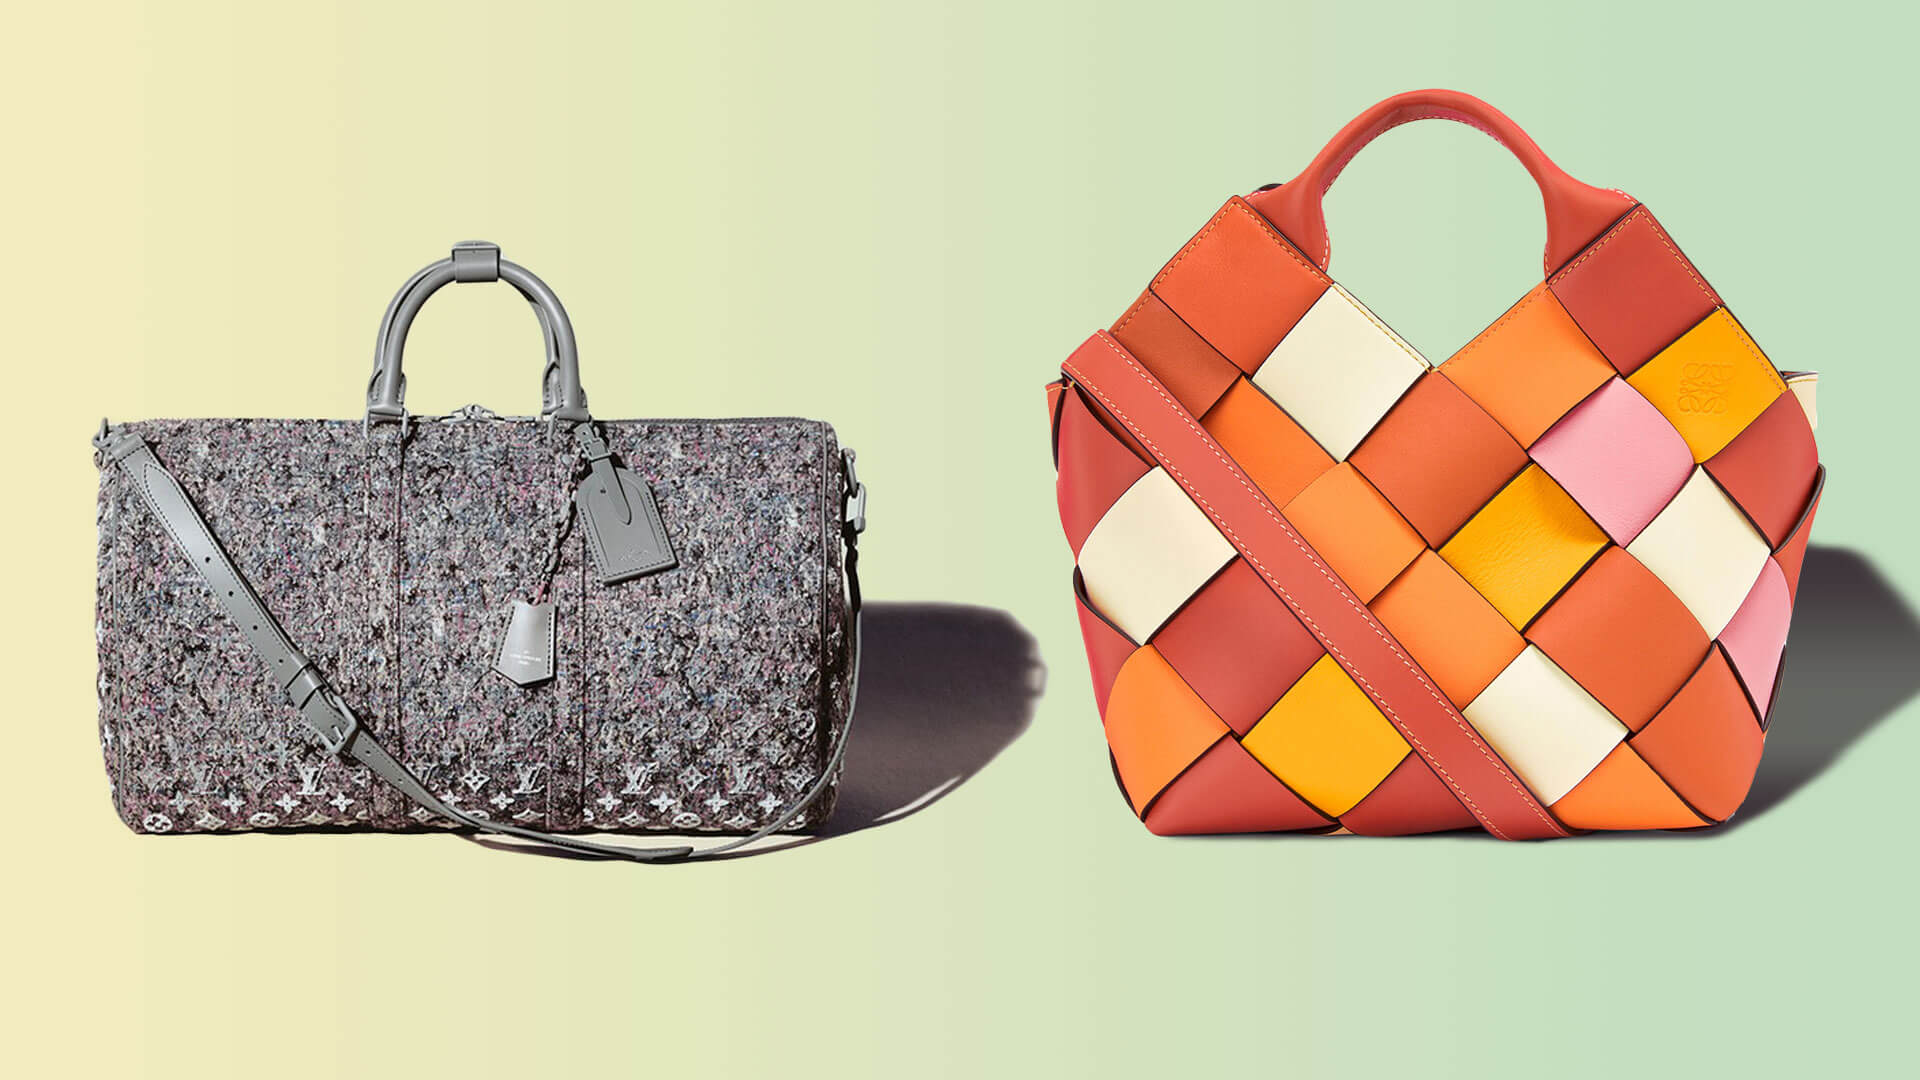 Louis Vuitton label multi-bag purse, features two layered handbags